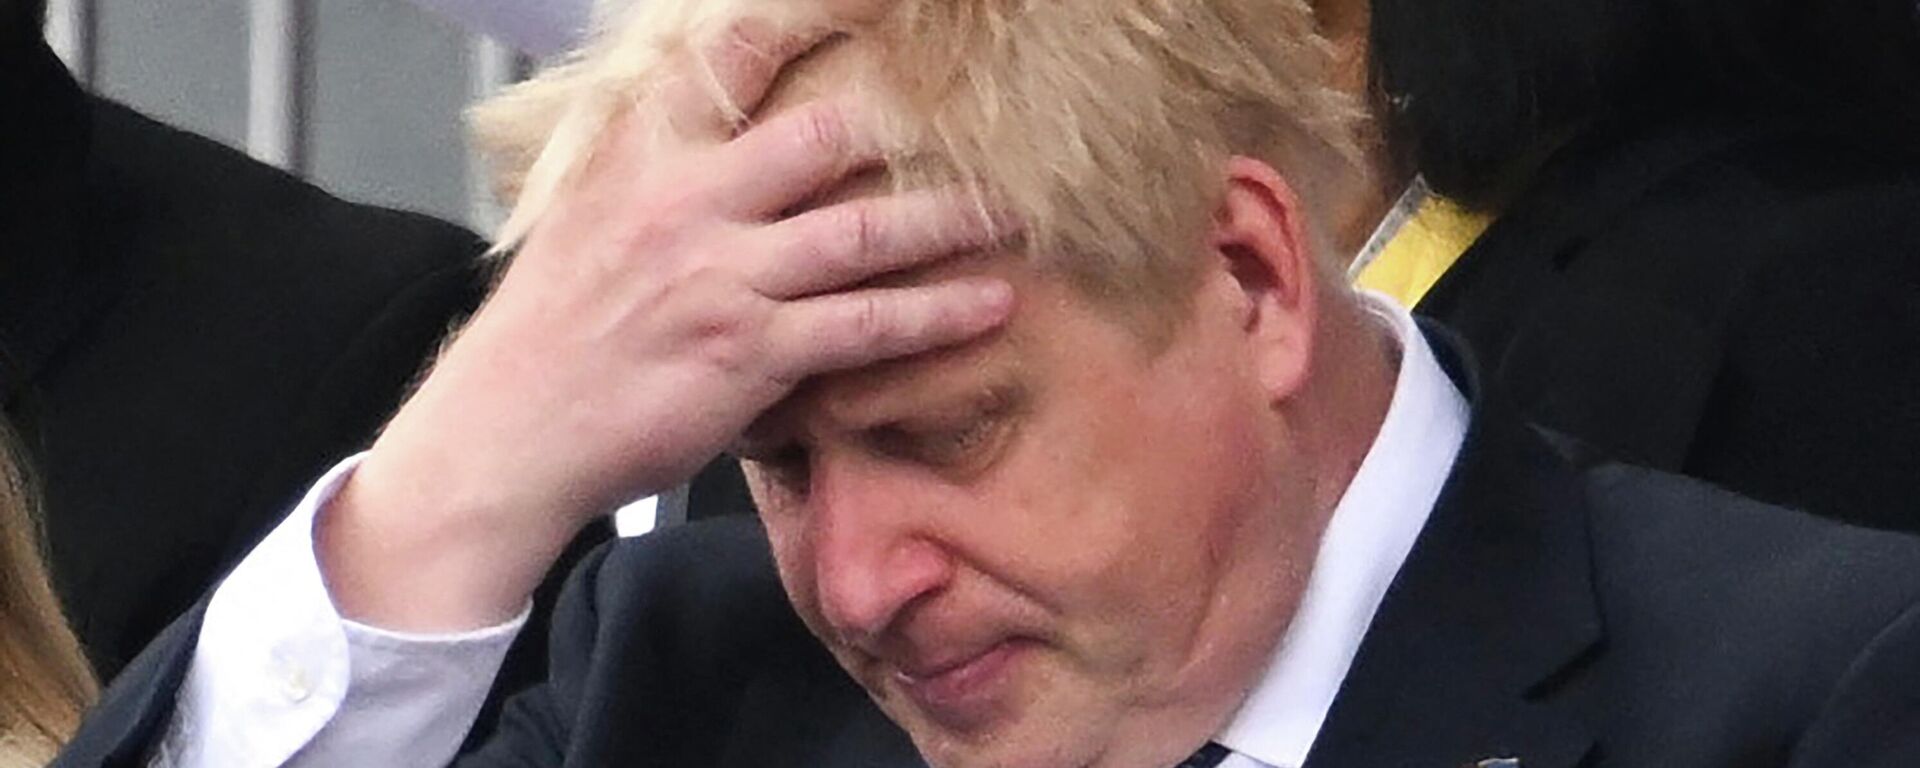 (FILES) In this file photo taken on June 5, 2022 shows Britain's Prime Minister Boris Johnson reacts during the Platinum Pageant in London on June 5, 2022 as part of Queen Elizabeth II's platinum jubilee celebrations - Sputnik International, 1920, 10.06.2022